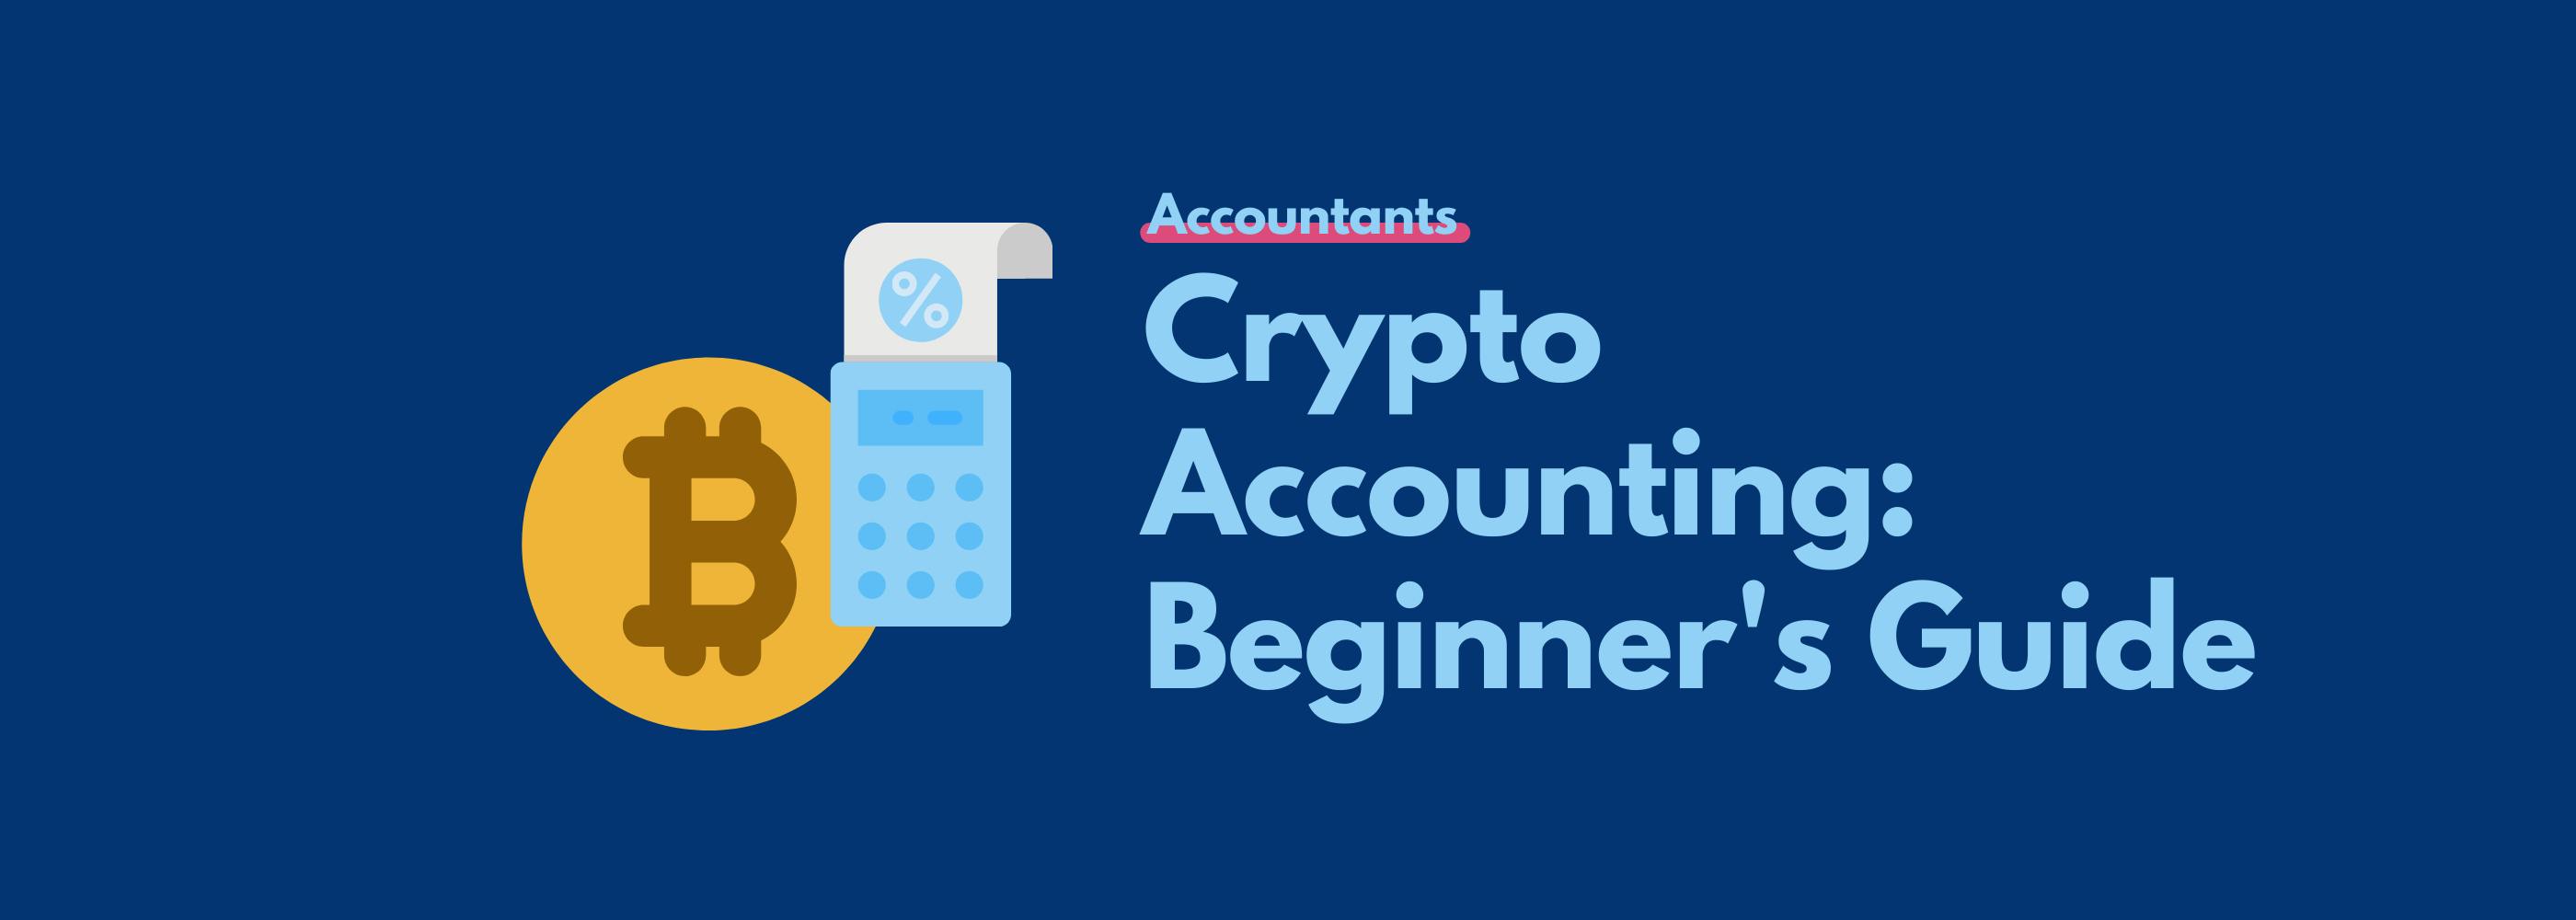 accounting cryptocurrency